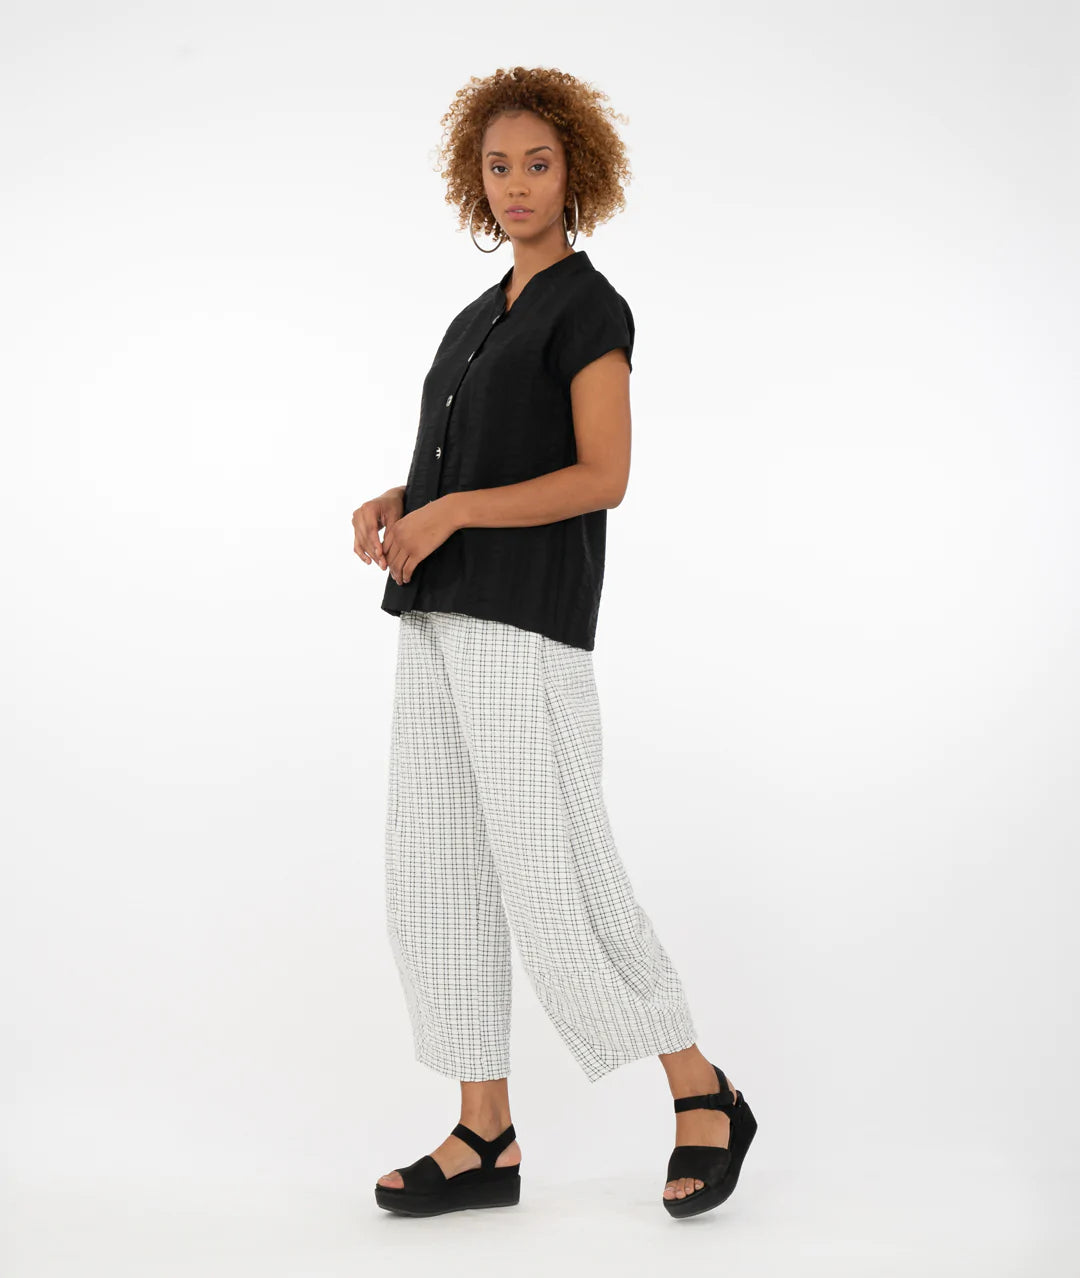 model wearing a black button up top with a black/white checkered pant in front of a white background